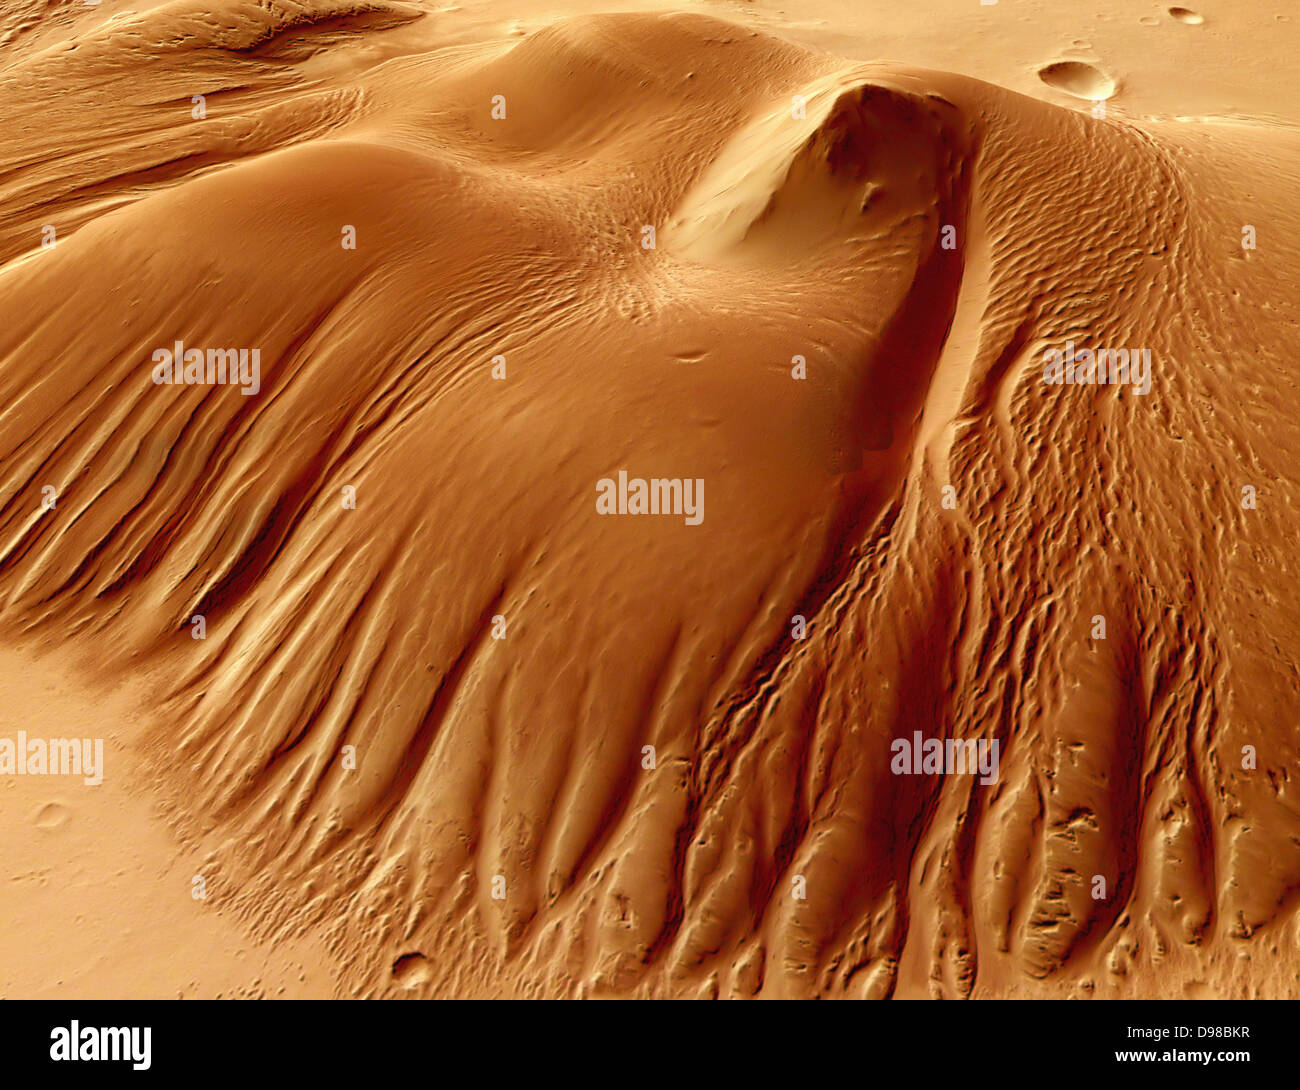 Mountain in the Nicholson crater. Perspective colour view of a 55 kilometre long and 37 kilometre wide massif in the middle of the Nicholson crater - detailed view. North is at the top. Nicholson is a crater on Mars centred at 0.1° N and 164.5° W. It is 62 miles wide (100 km), and located in the Memnonia quadrangle. Nicholson is a good marker for the equator as it sits almost directly on the Martian equator. It is named after Seth Barnes Nicholson, an American astronomer. Stock Photo